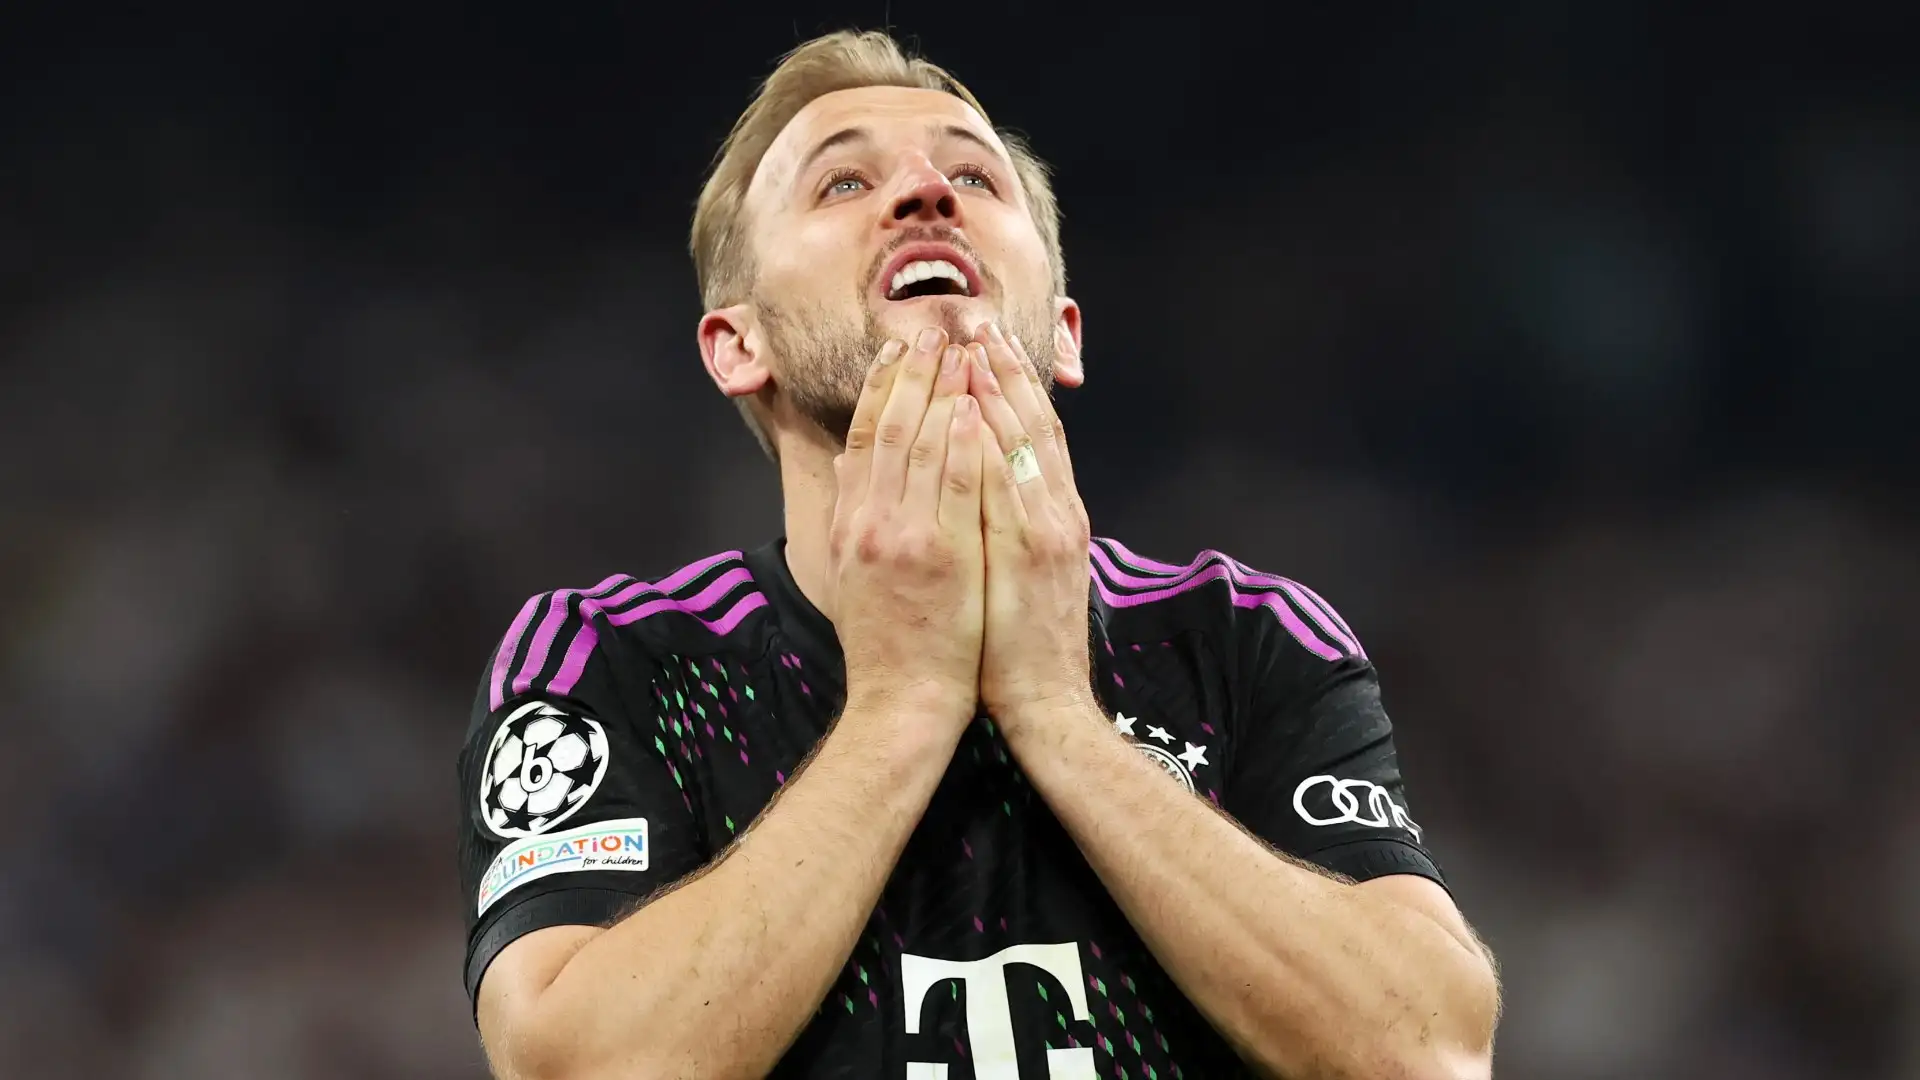 Harry Kane must go! Bayern Munich told to sell £100m English striker despite incredible goal record